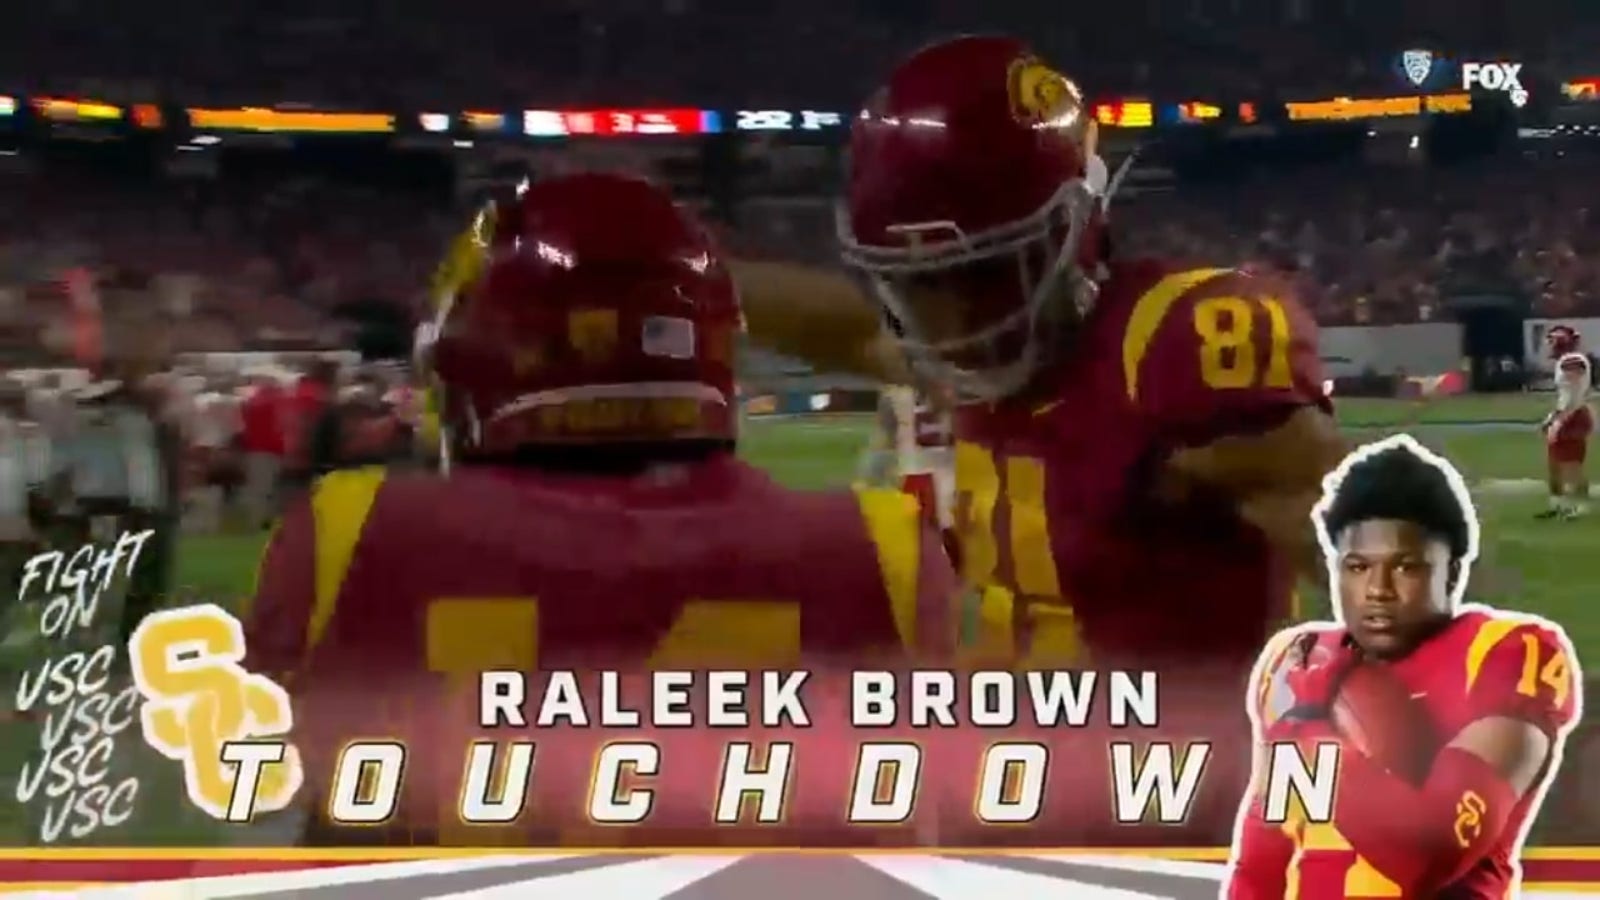 Caleb Williams found Raleek Brown for another score in the first quarter